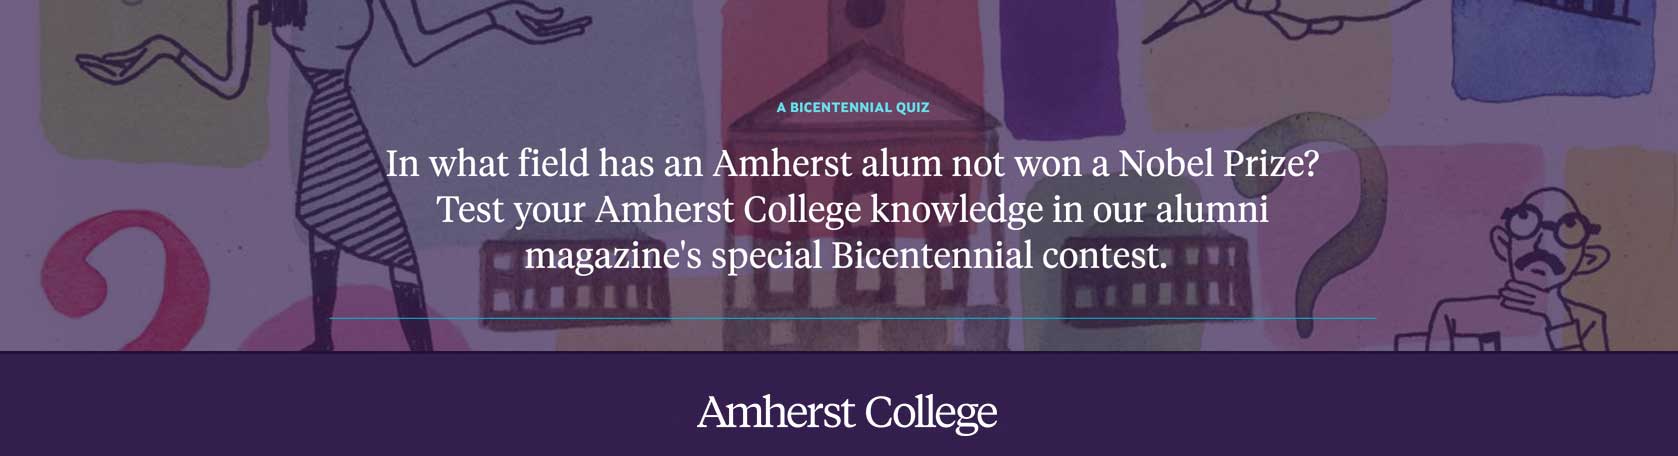 Test Your Amherst College knowledge